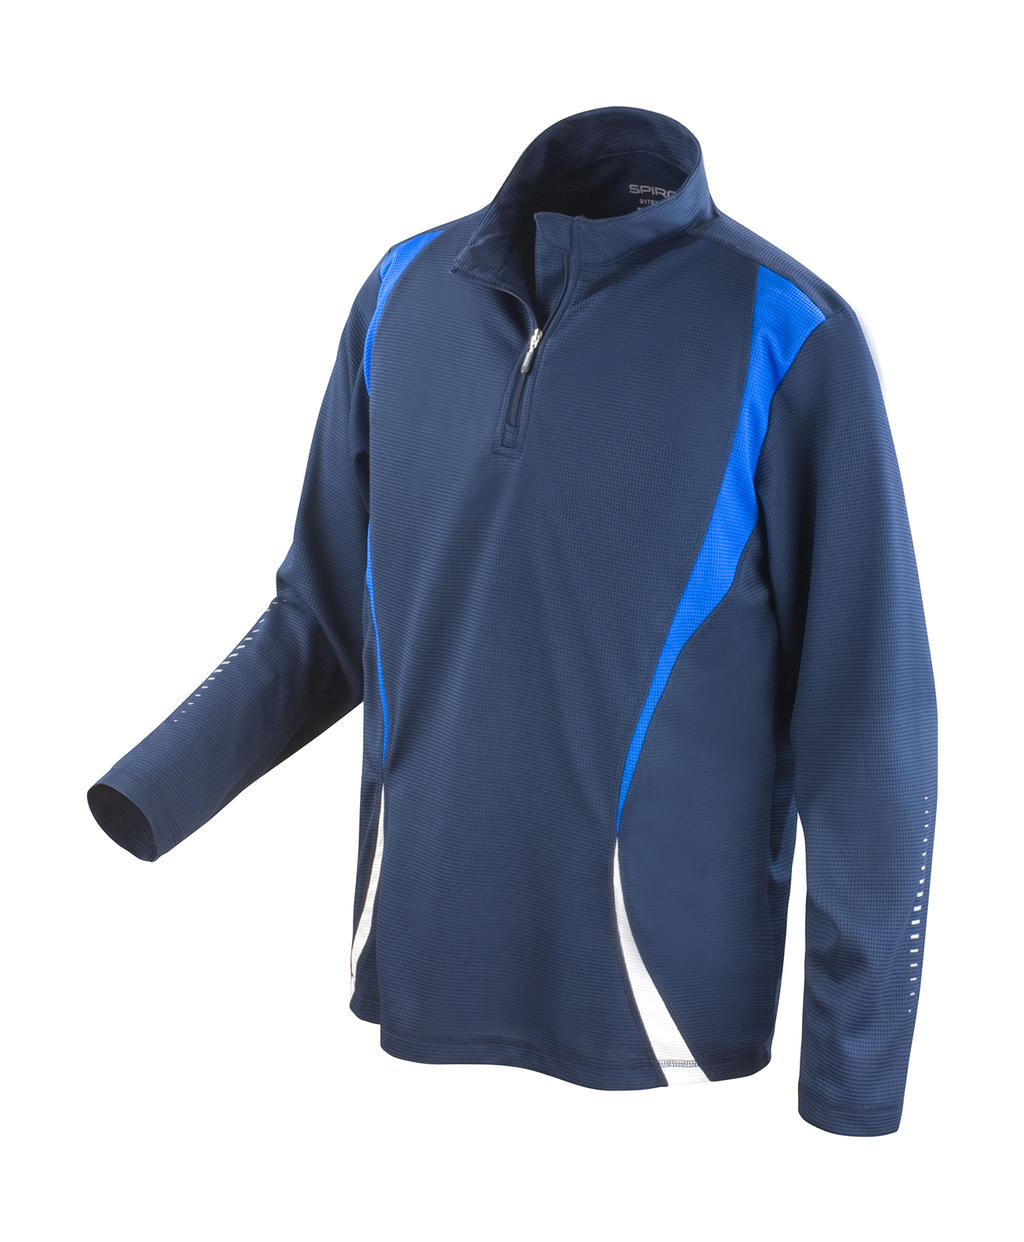  Spiro Trial Training Top in Farbe Navy/Royal/White